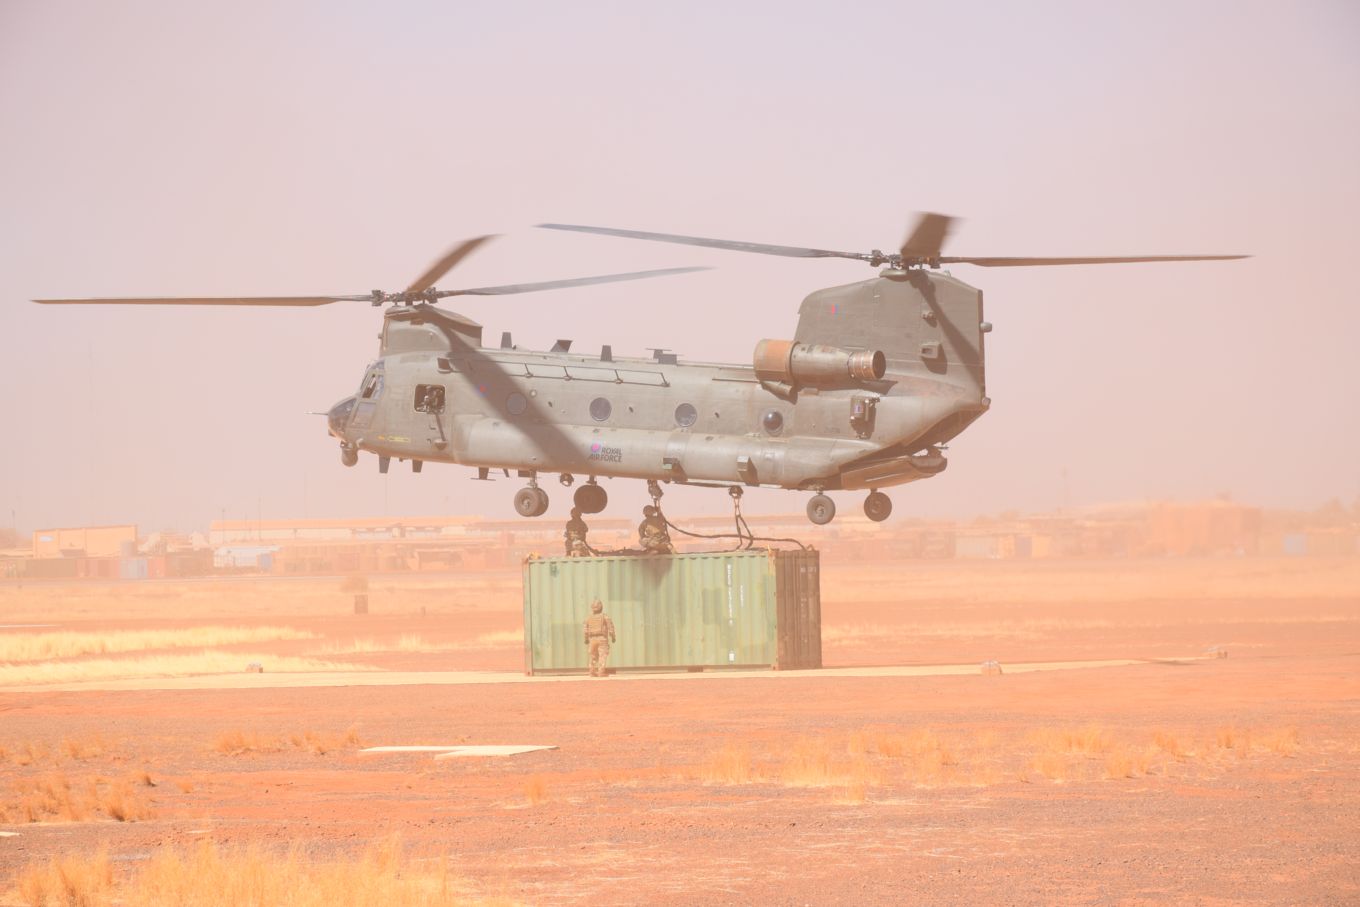 Image shows RAF Chinook in the desert landing the container on the ground.